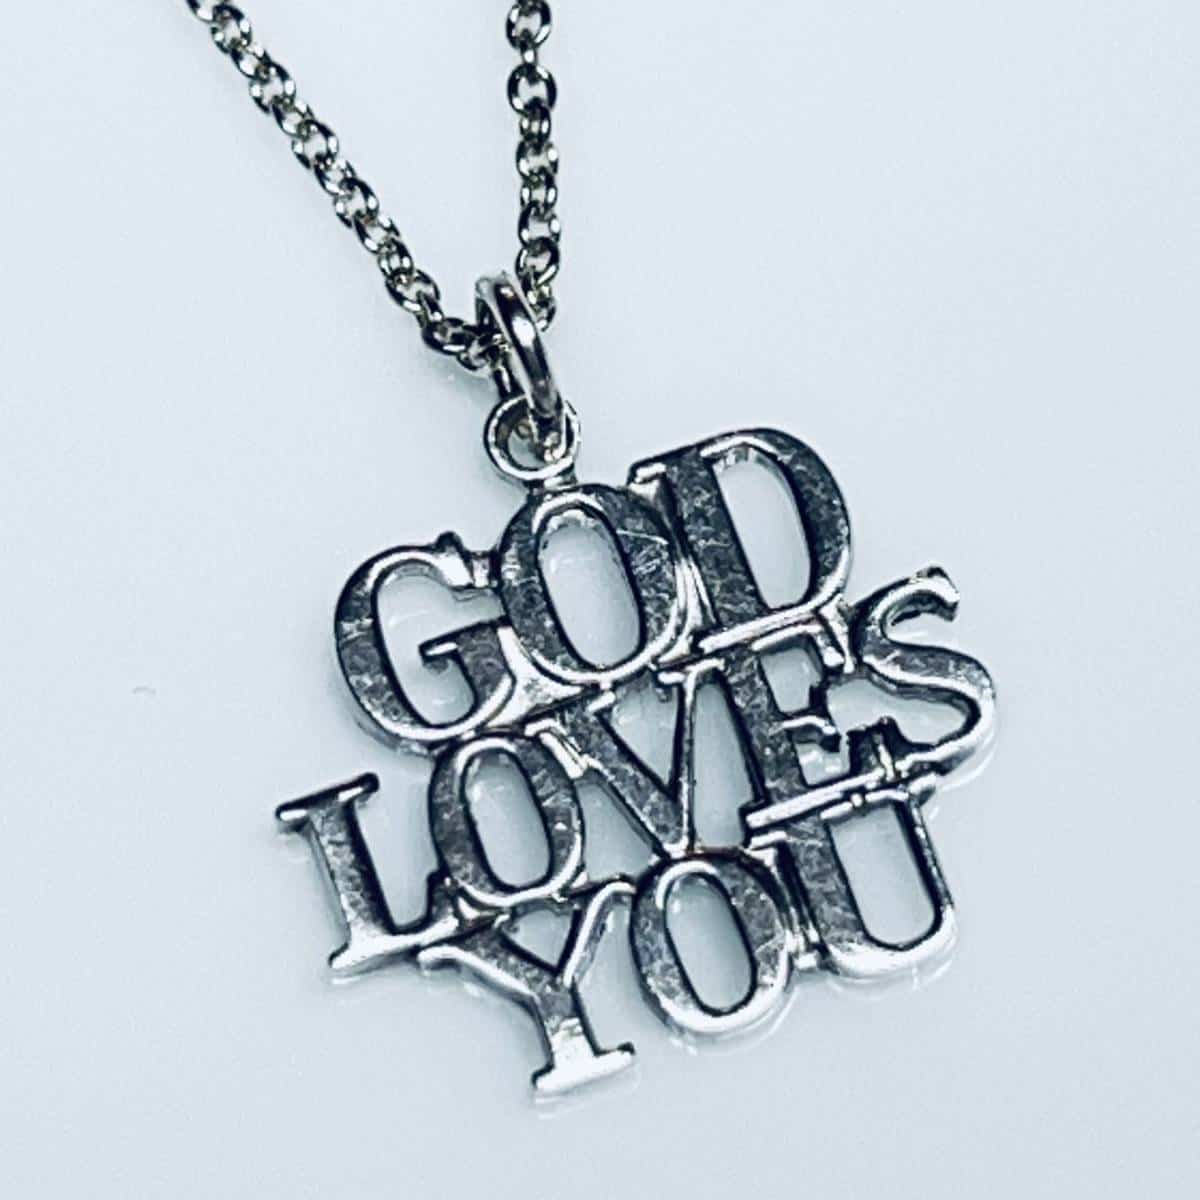 Used]VINTAGE TIFFANY and CO. Vintage Tiffany GOD LOVES YOU charm